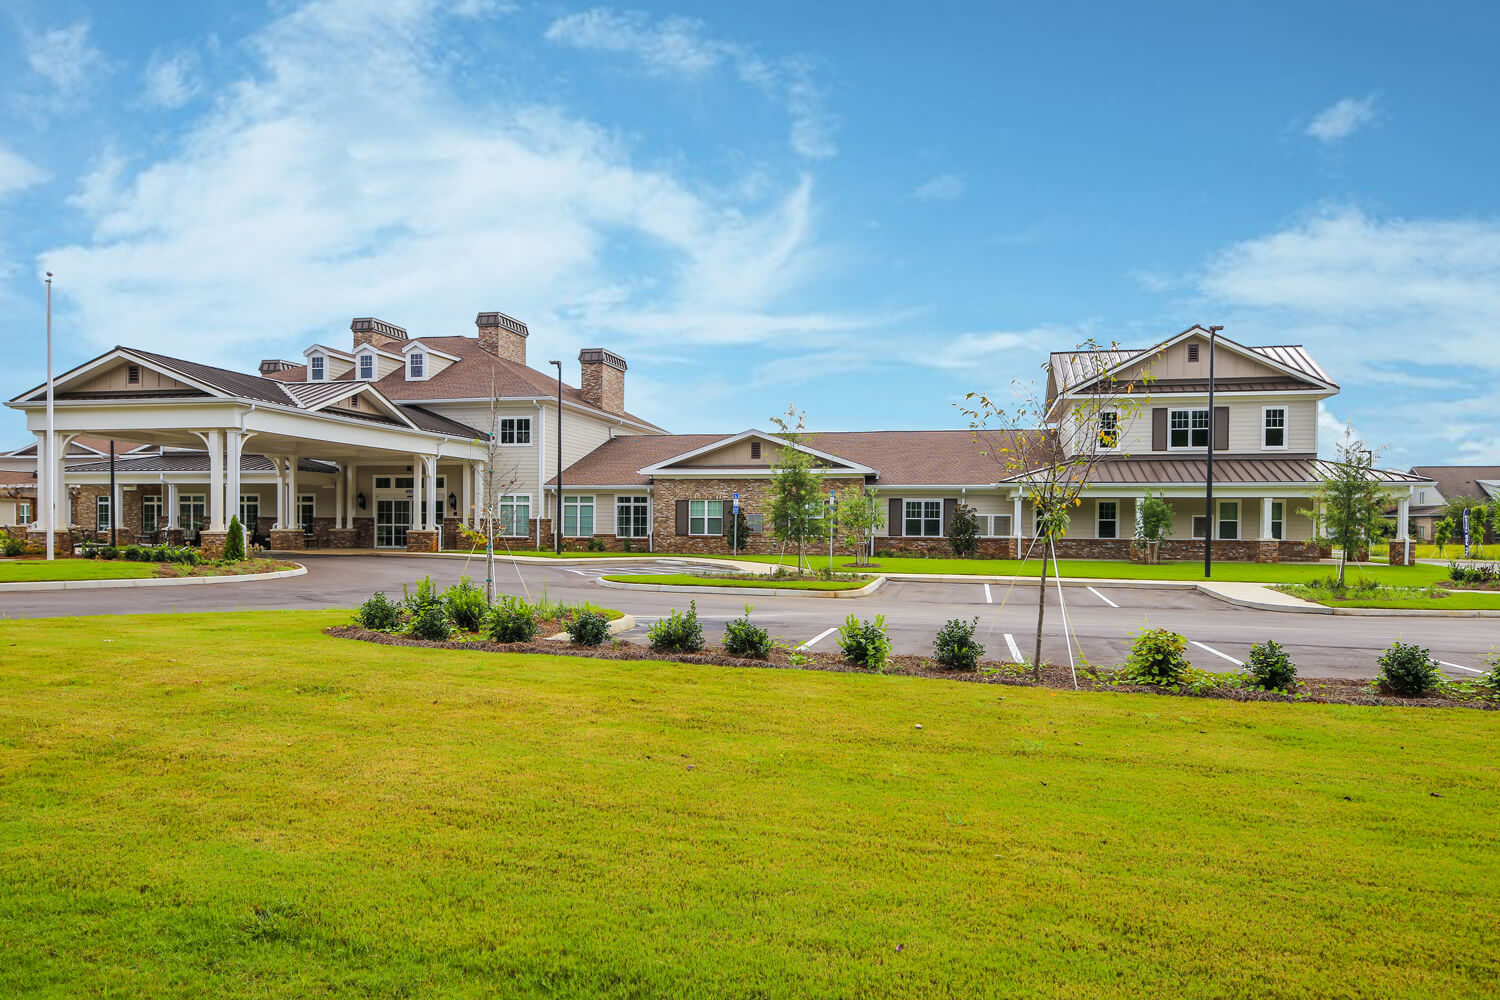 Grand South Senior Living - View from Street - Designed by Foshee Architecture